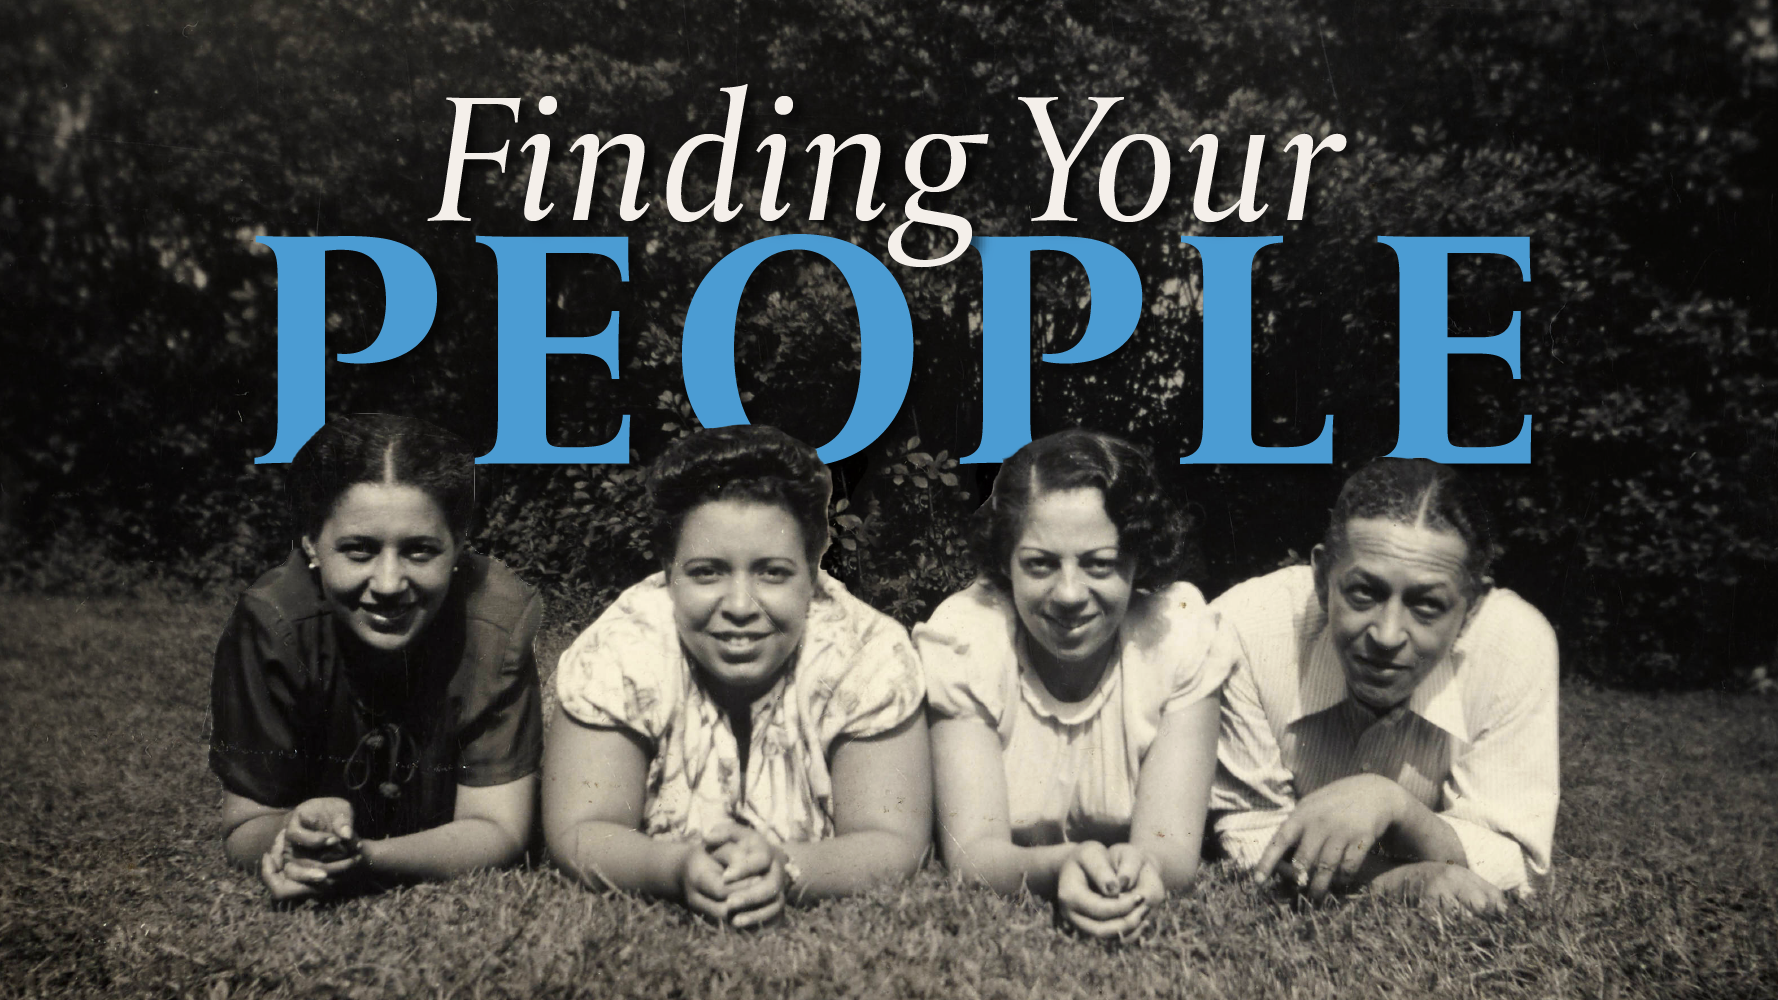 Text illustration reading "Finding Your People" juxtaposed on top of a black and white archival photograph of a group of young people laying down outside on the grass.